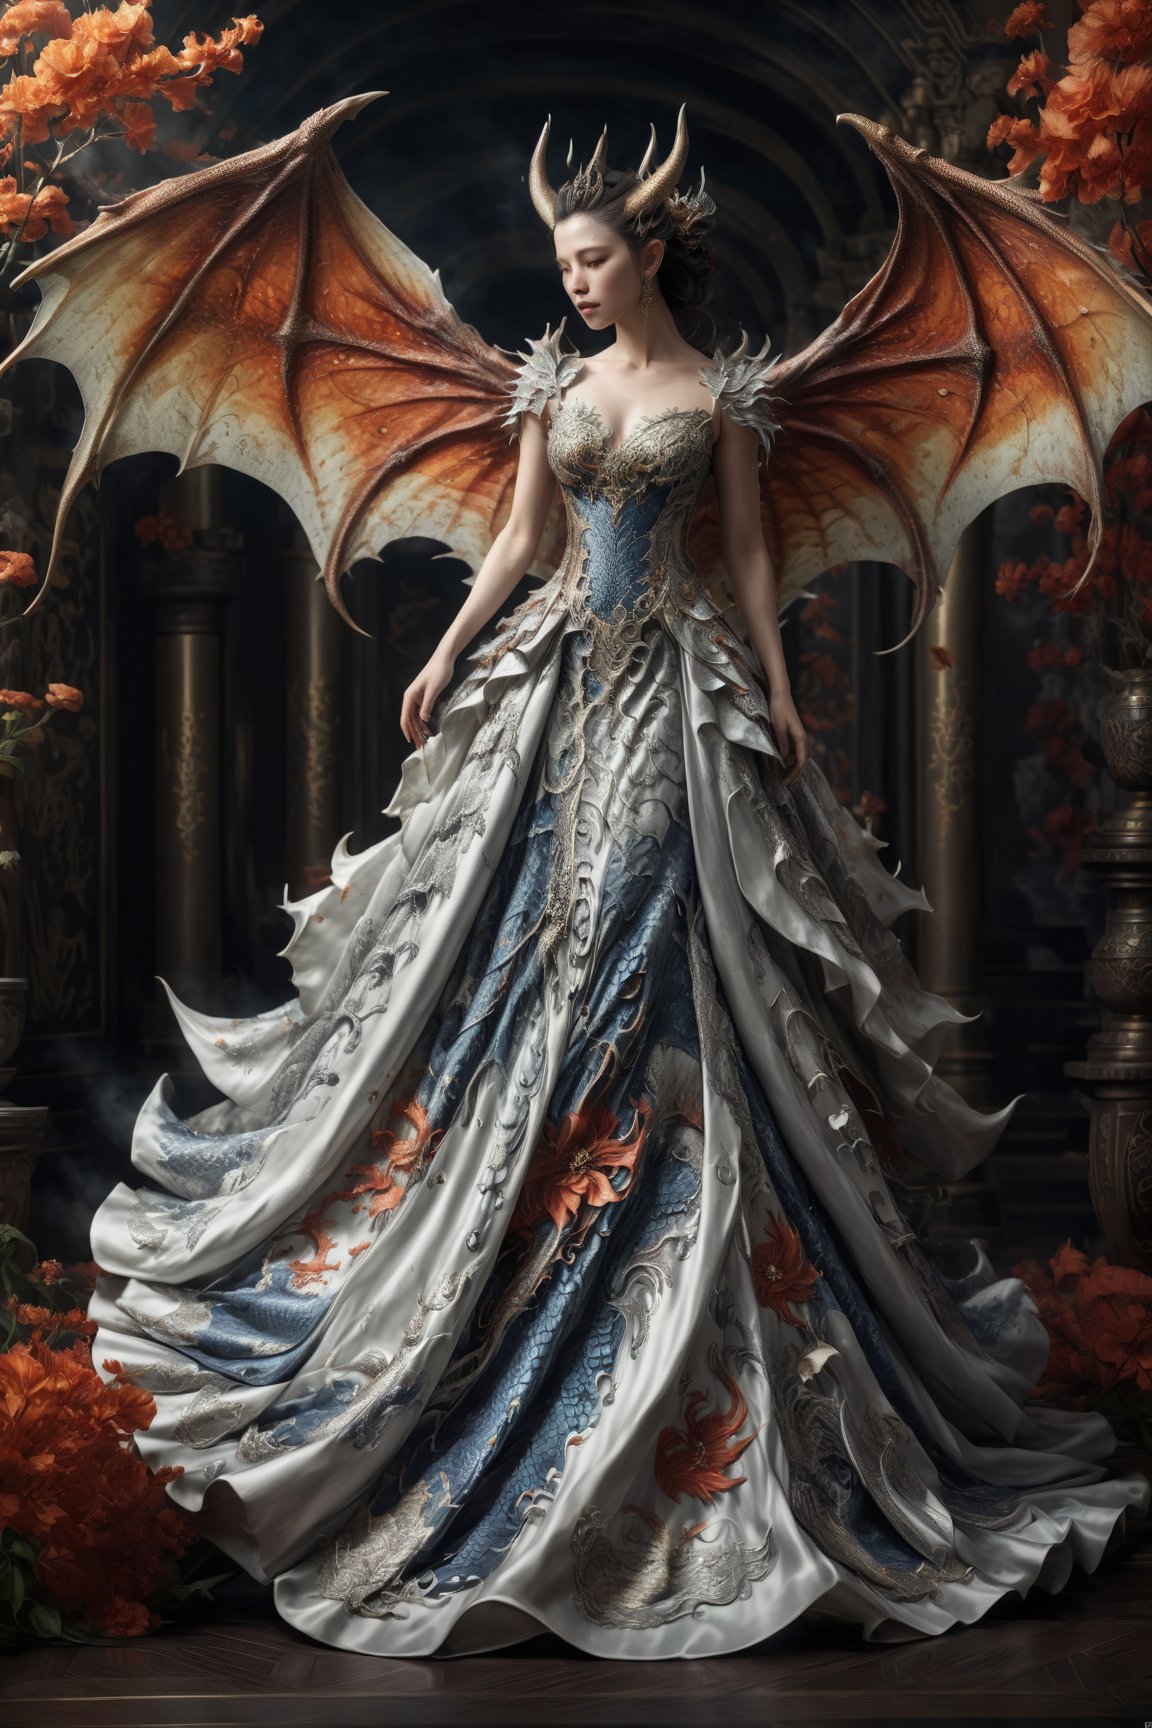 Dragon inspired dress, Masterpiece, Best Quality:1.3), highres, (8k resolution), , madgod, horror, floating, demon, full angle view, hyperrealistic, raytracing, extremely detail, full background, falling, silver trim, flower, fantasy, nightmare, bloom, cinematic lighting, dynamic, intricate details,deep depth iof field, twisted horn